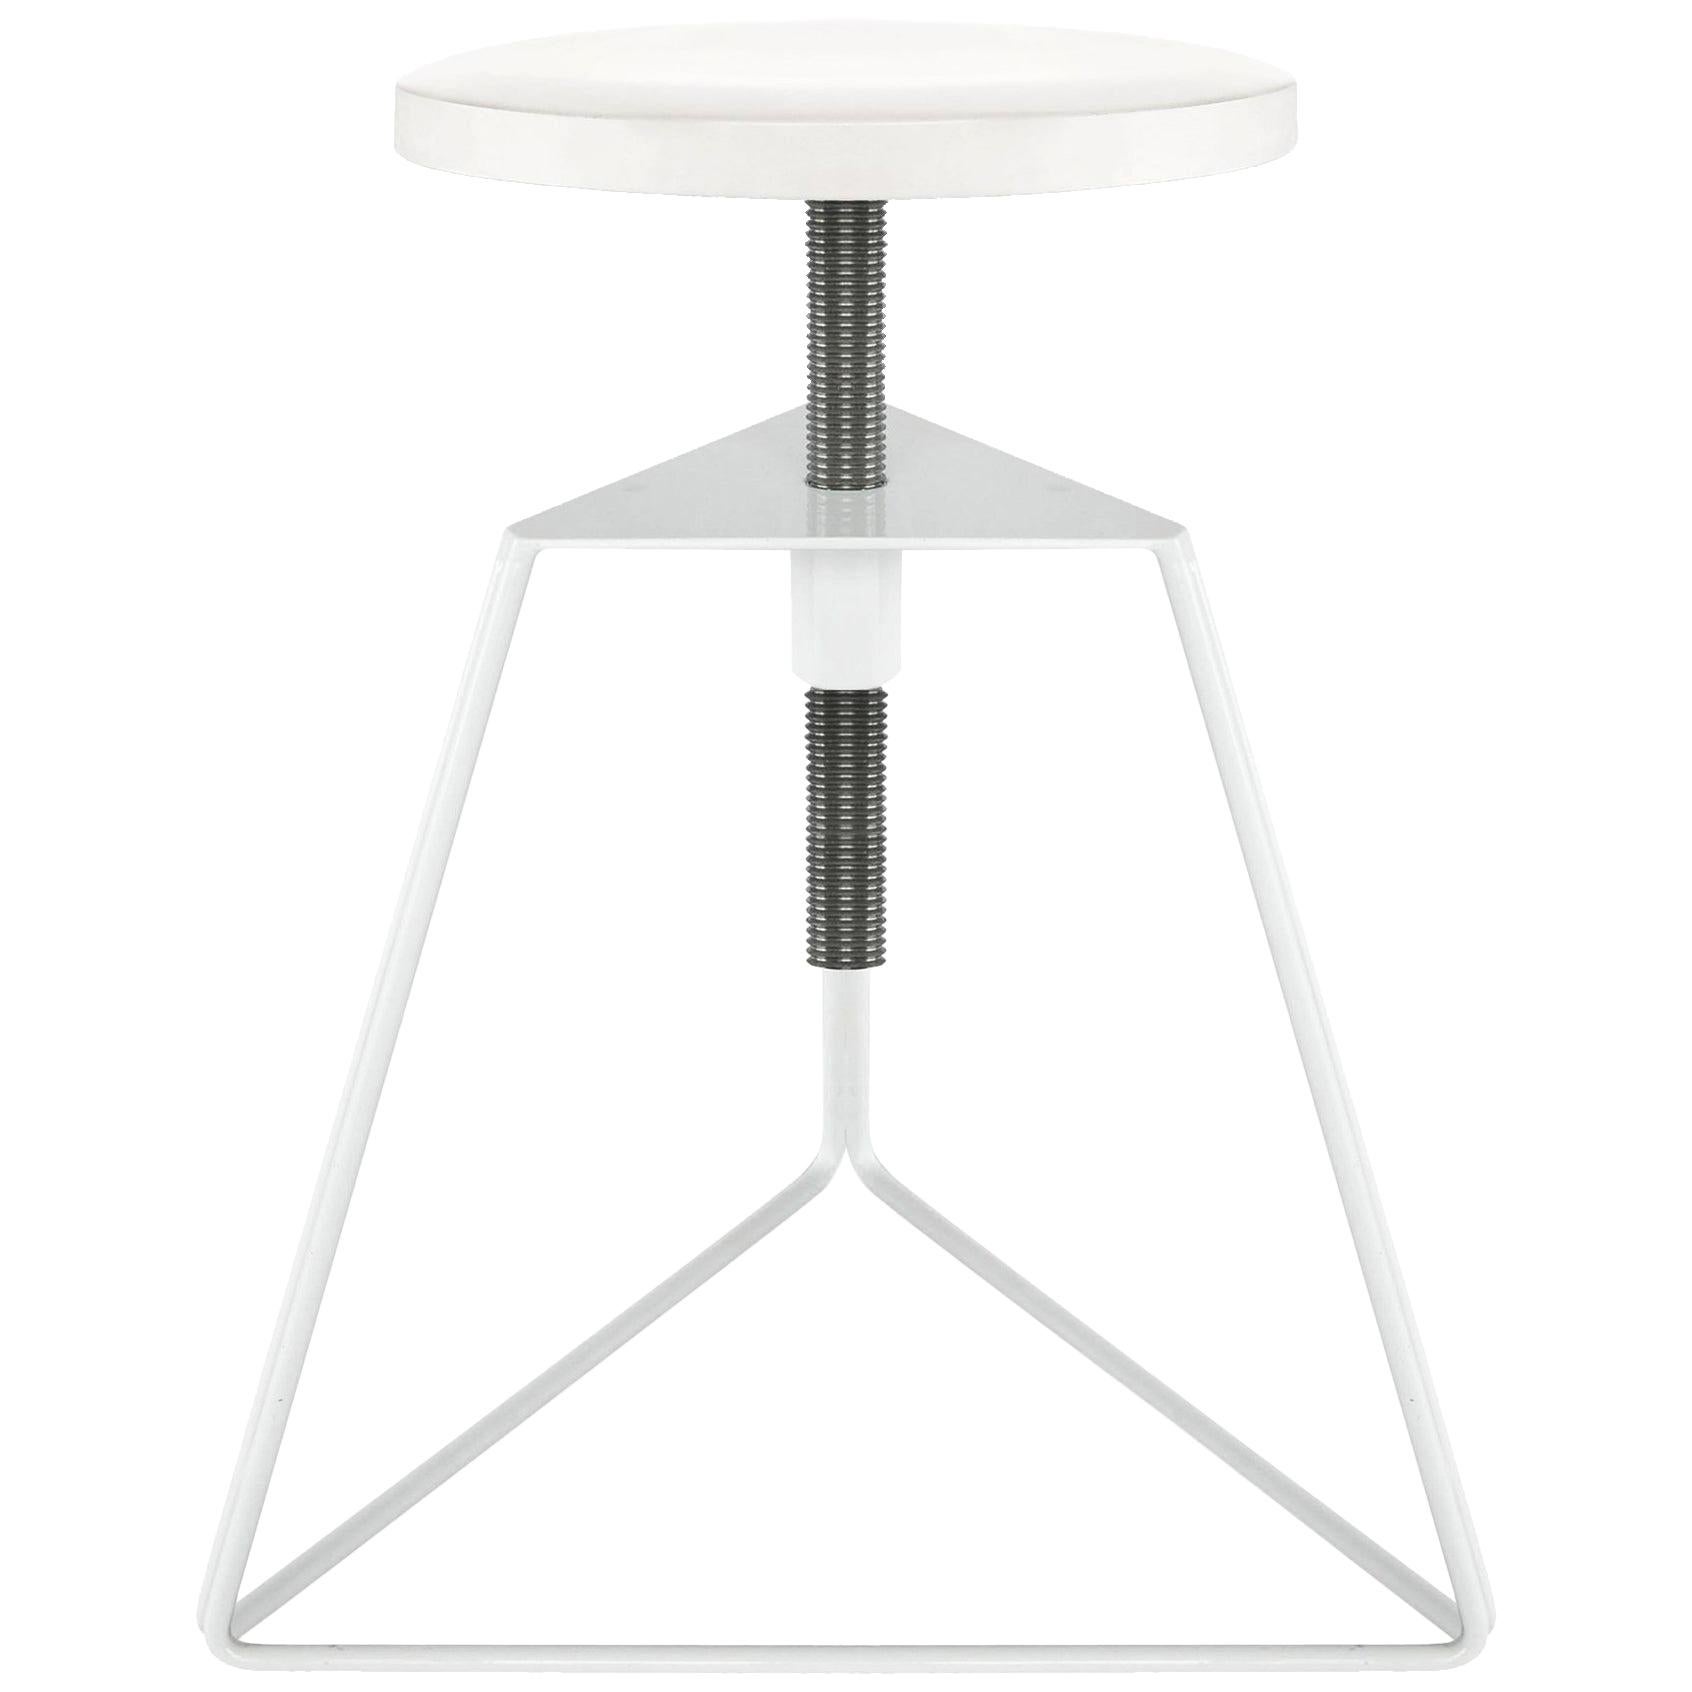 Camp Stool, White Marble, Adjustable Height Stool, 18 Variations, USA Made For Sale